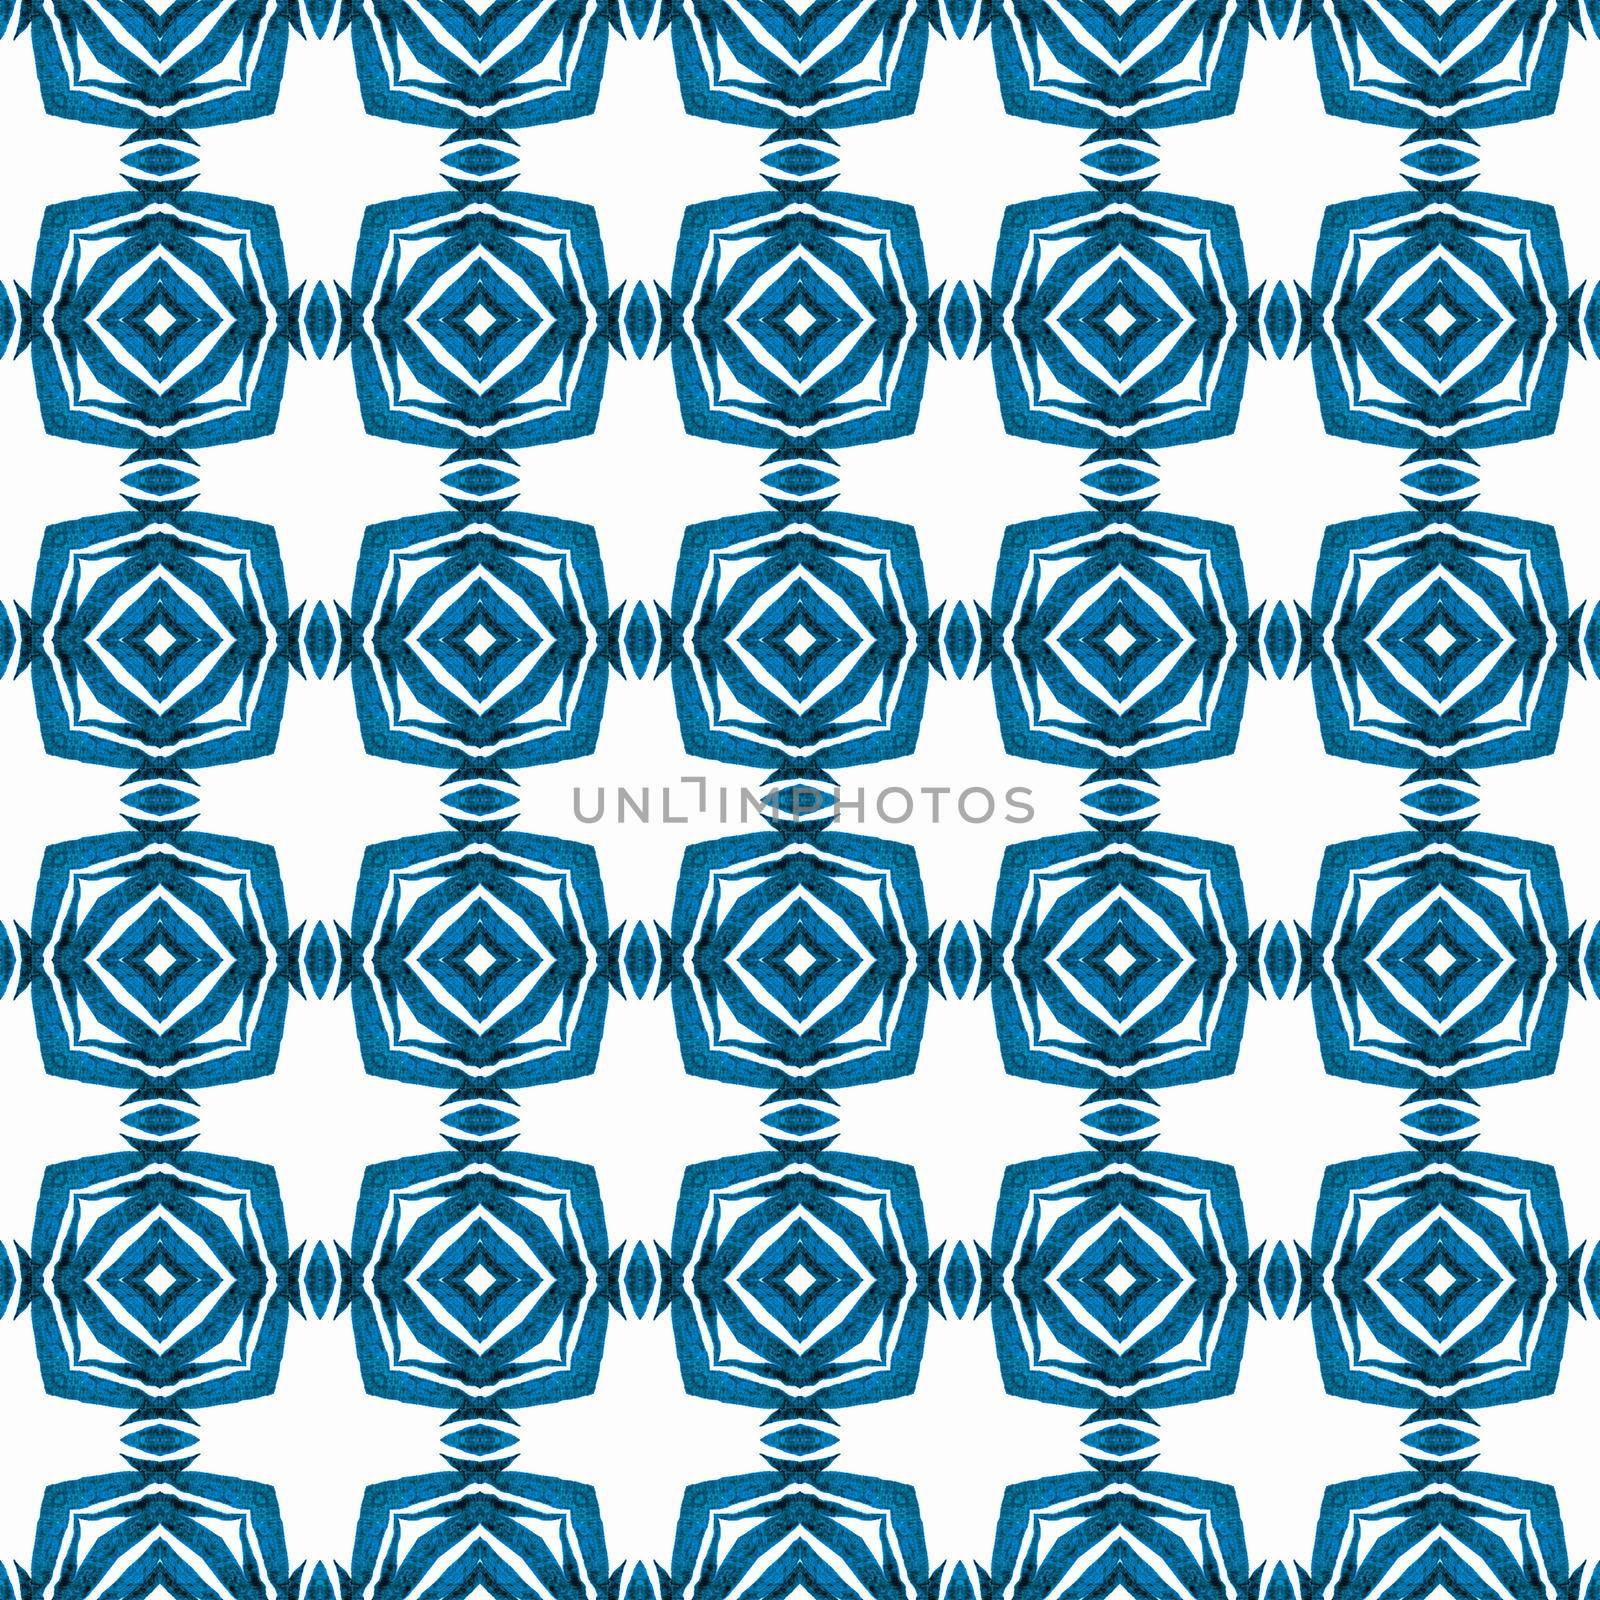 Medallion seamless pattern. Blue incredible boho chic summer design. Watercolor medallion seamless border. Textile ready extra print, swimwear fabric, wallpaper, wrapping.